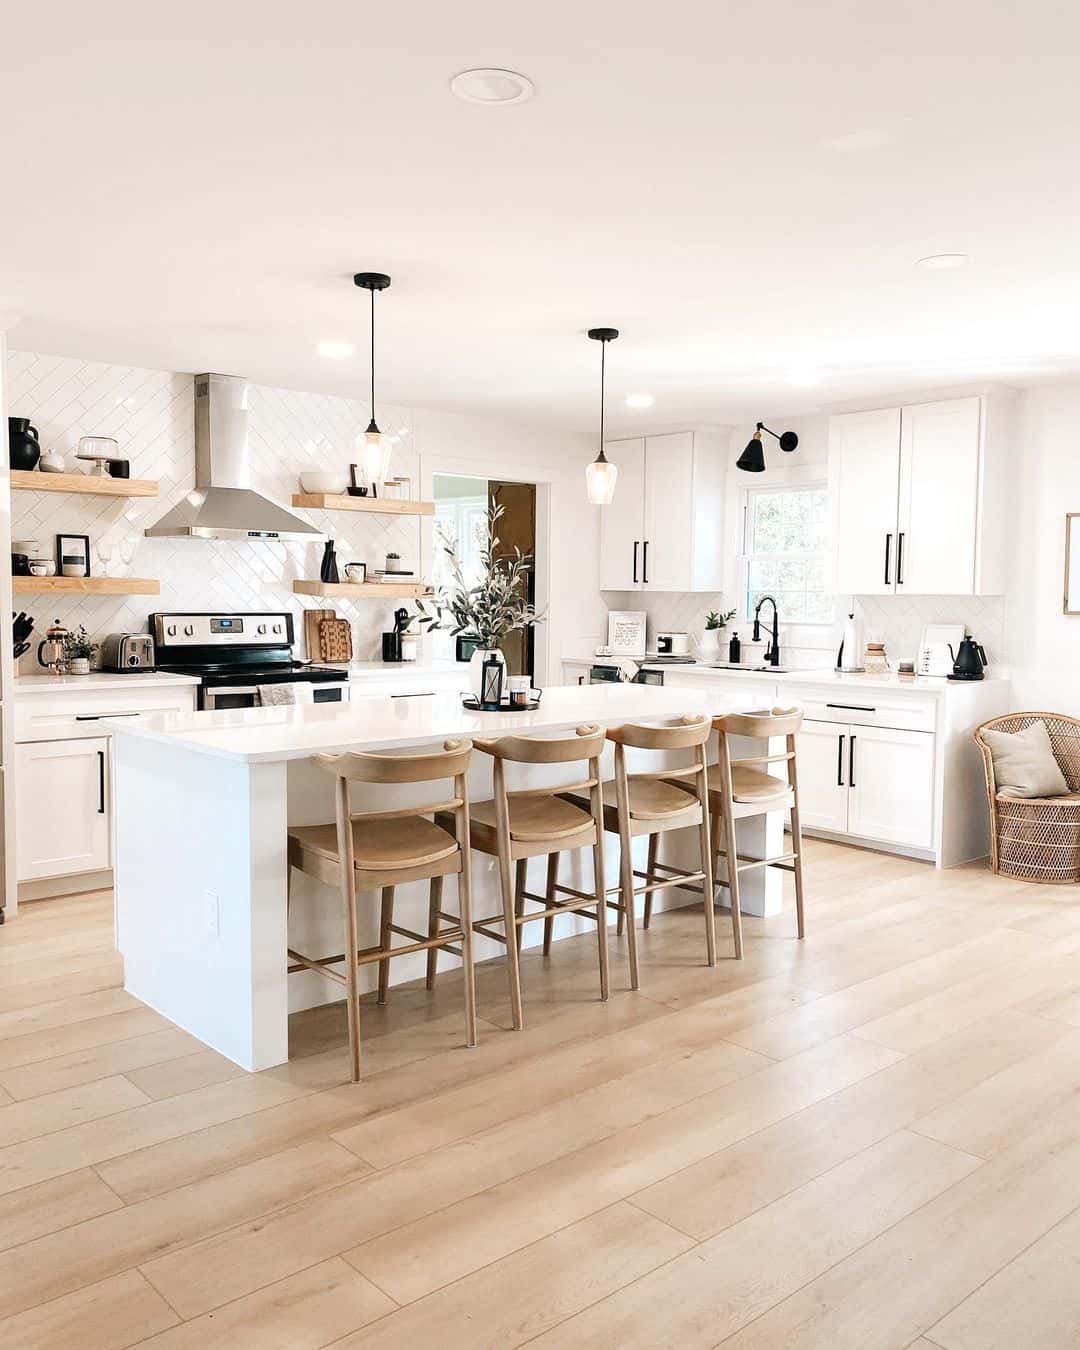 Blending Black, White, and Wood in the Kitchen